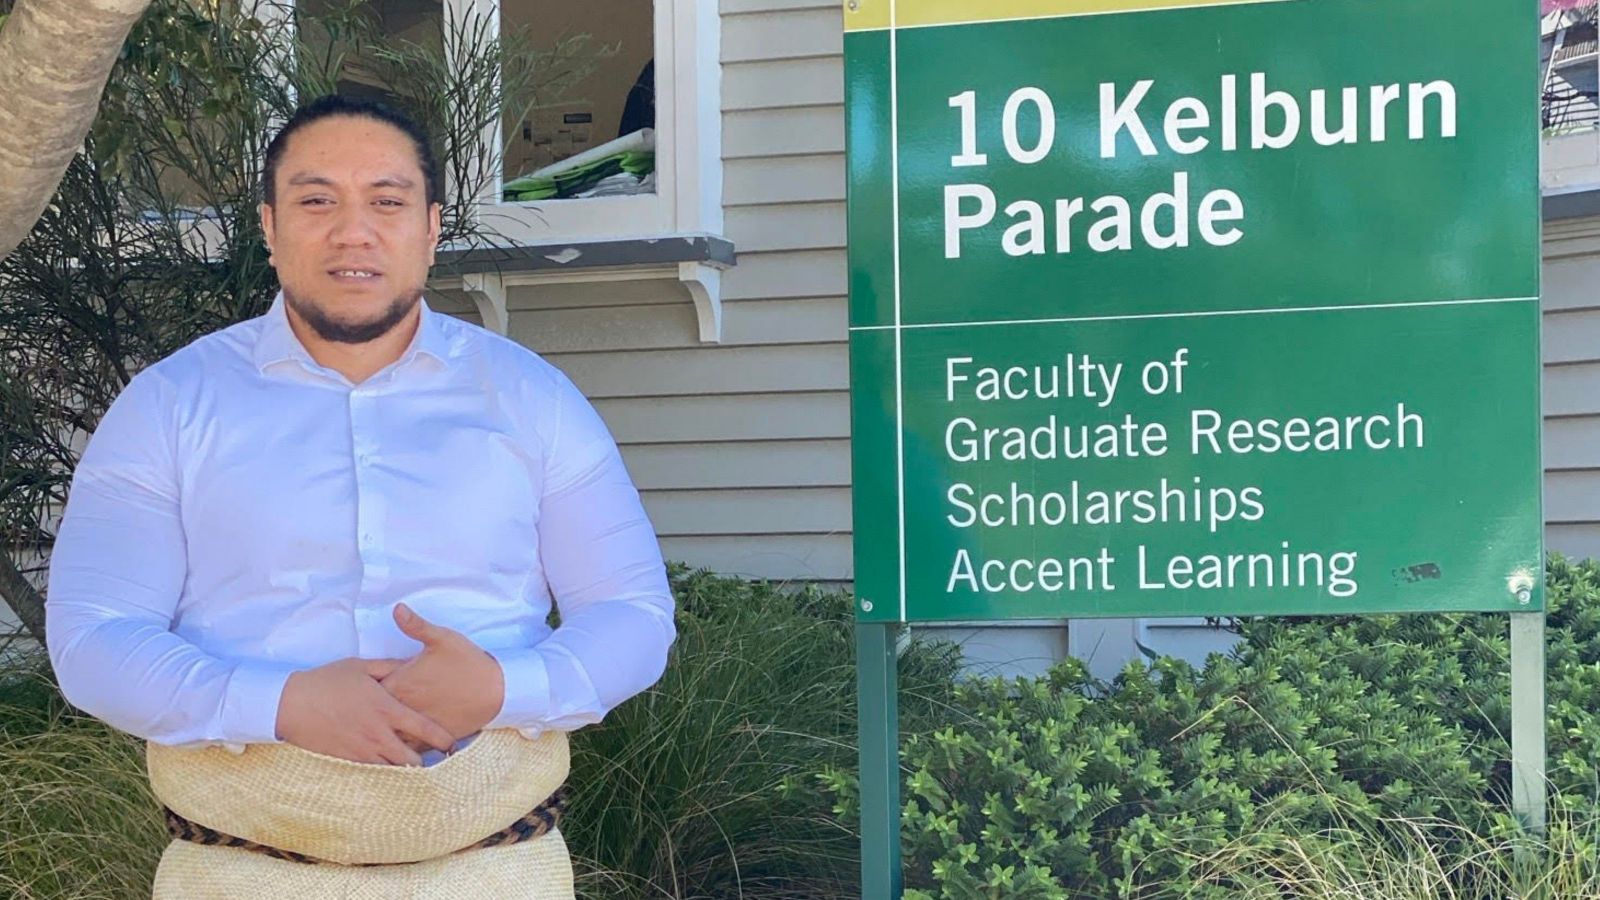 Man with tongan woven tupengu standing beside green sign which says 10 Kelburn Parade, Faculty of Graduate Research, Scholarships, Accent Learning